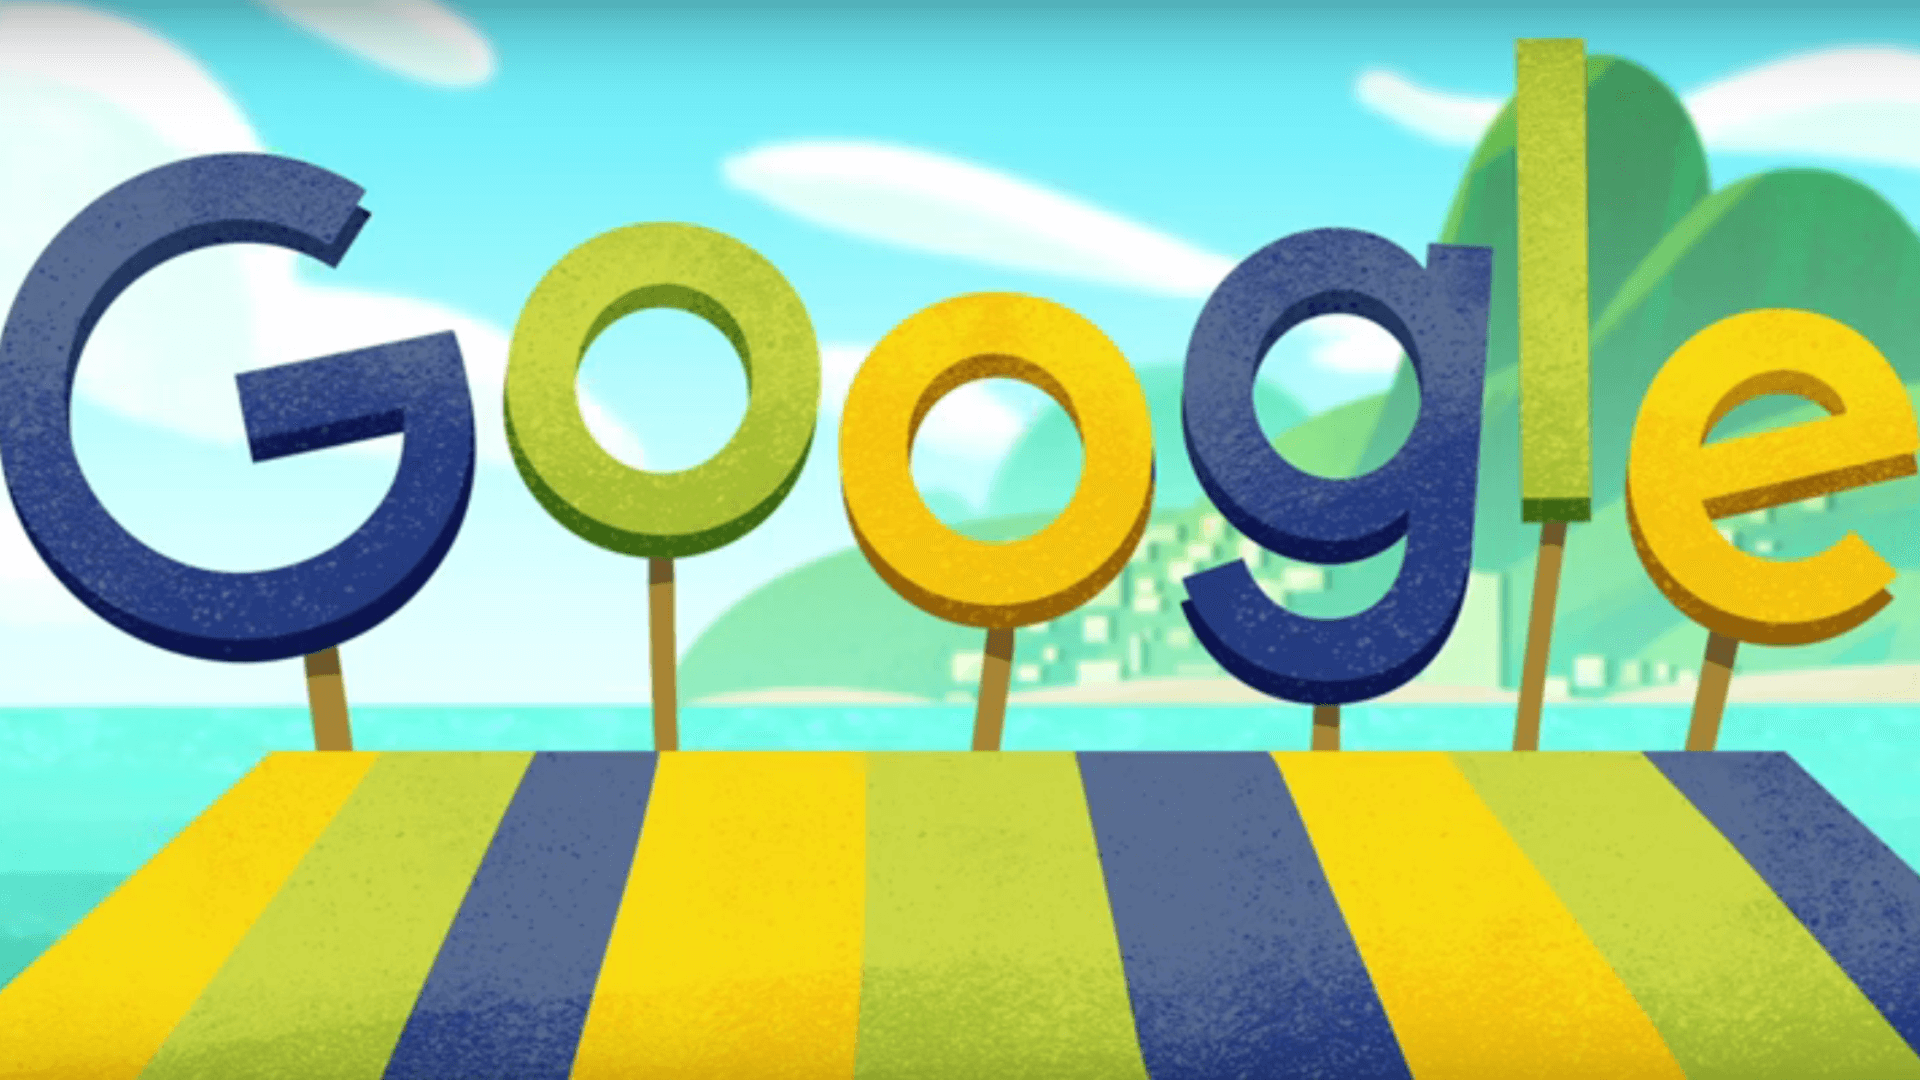 Olympic Google Logo - days of 2016 Rio Olympic Google Doodles: a full list of Google's